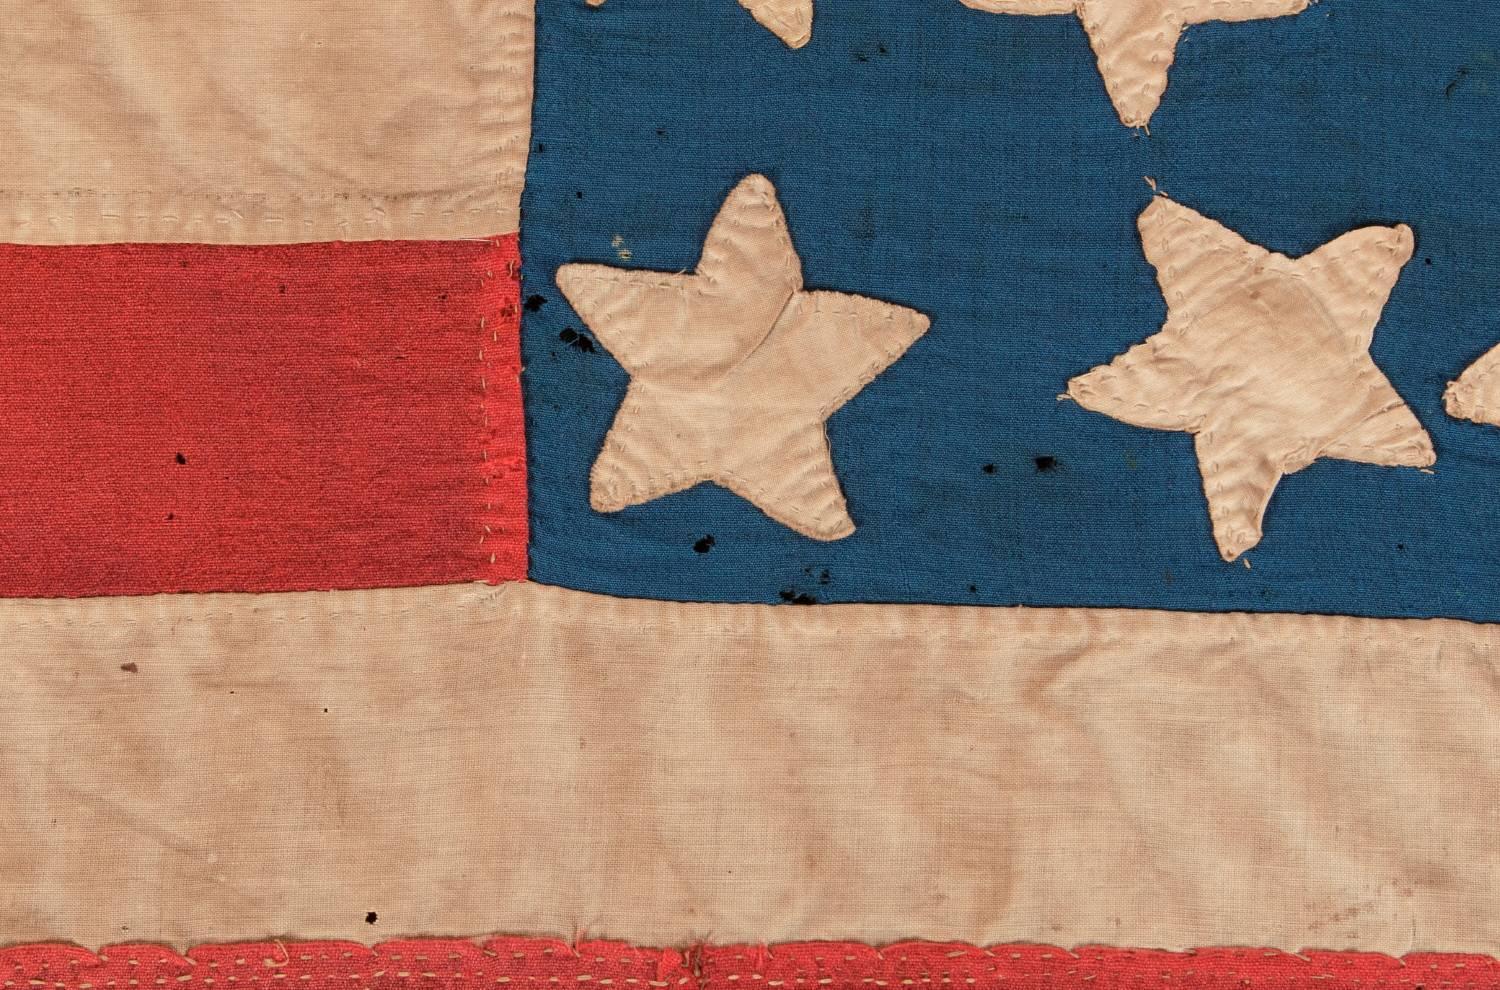 34 Star, Hand-Sewn, Homemade Antique American Flag of the Civil War Period 1